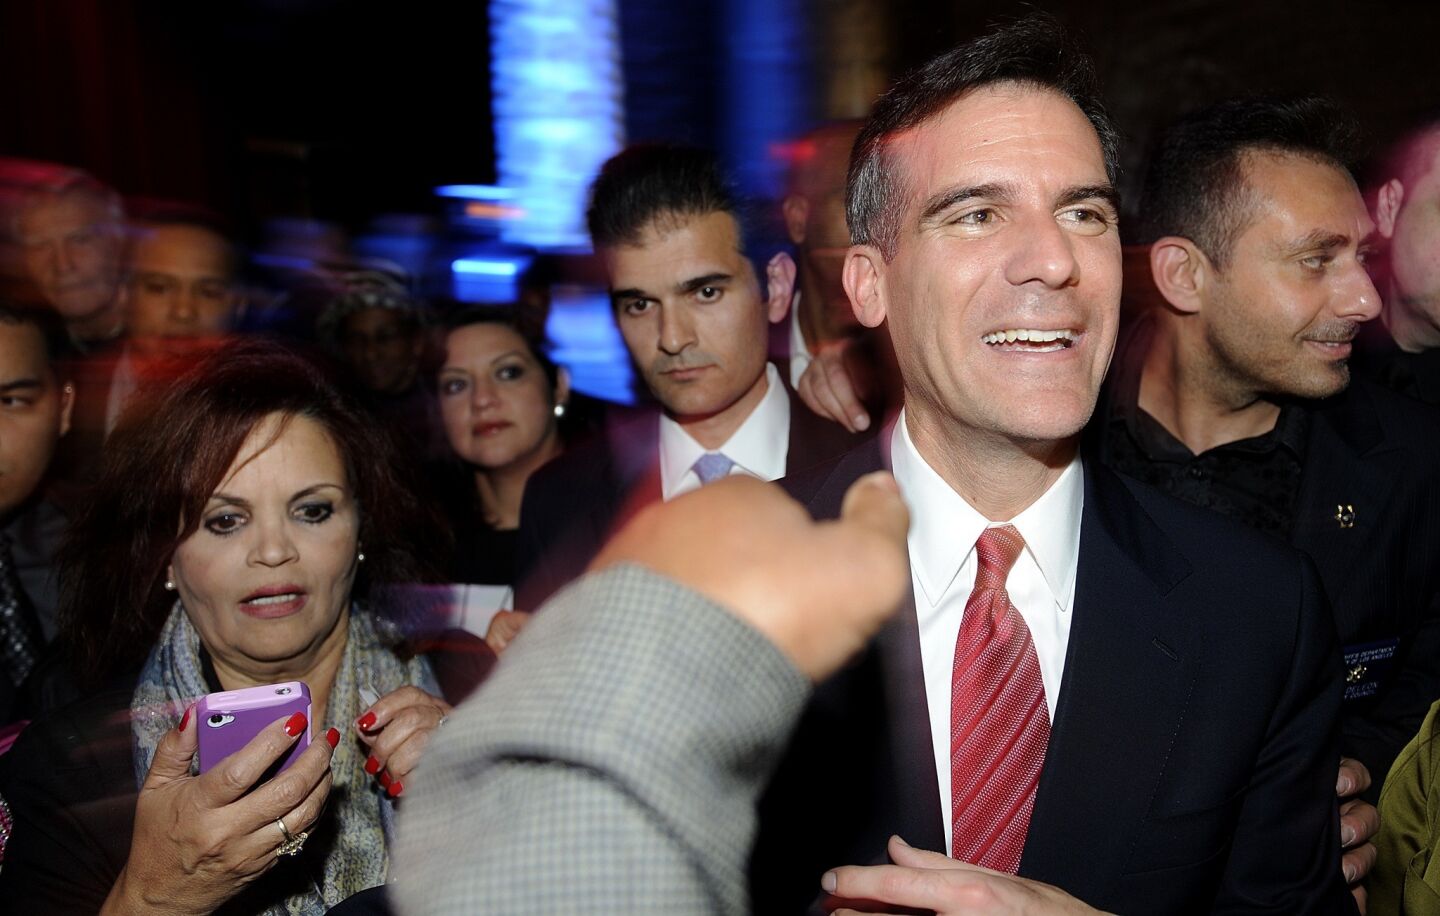 Mayoral candidate Eric Garcetti greets his supporters on election night at the Avalon in Los Angeles on Tuesday.